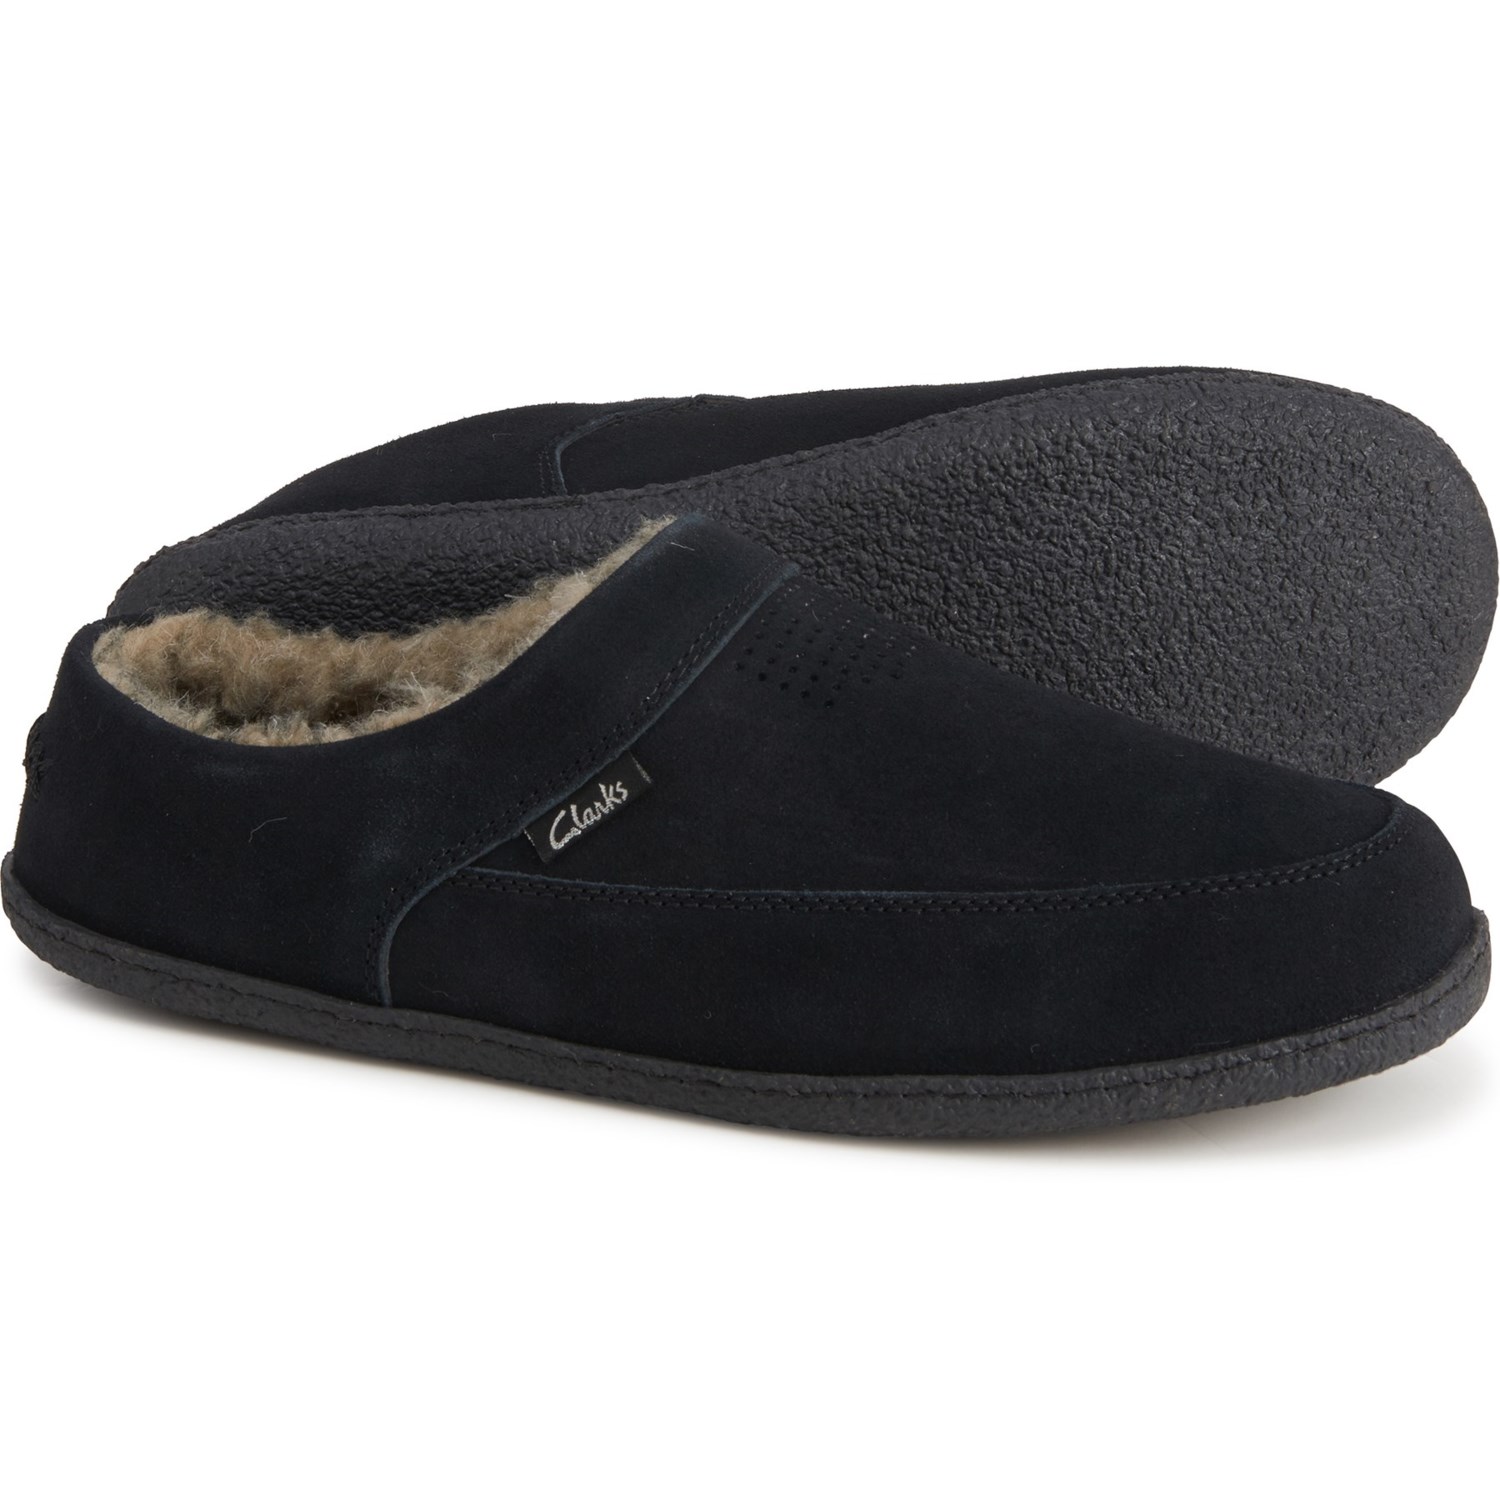 Clarks Perforated Suede Scuff Slippers 